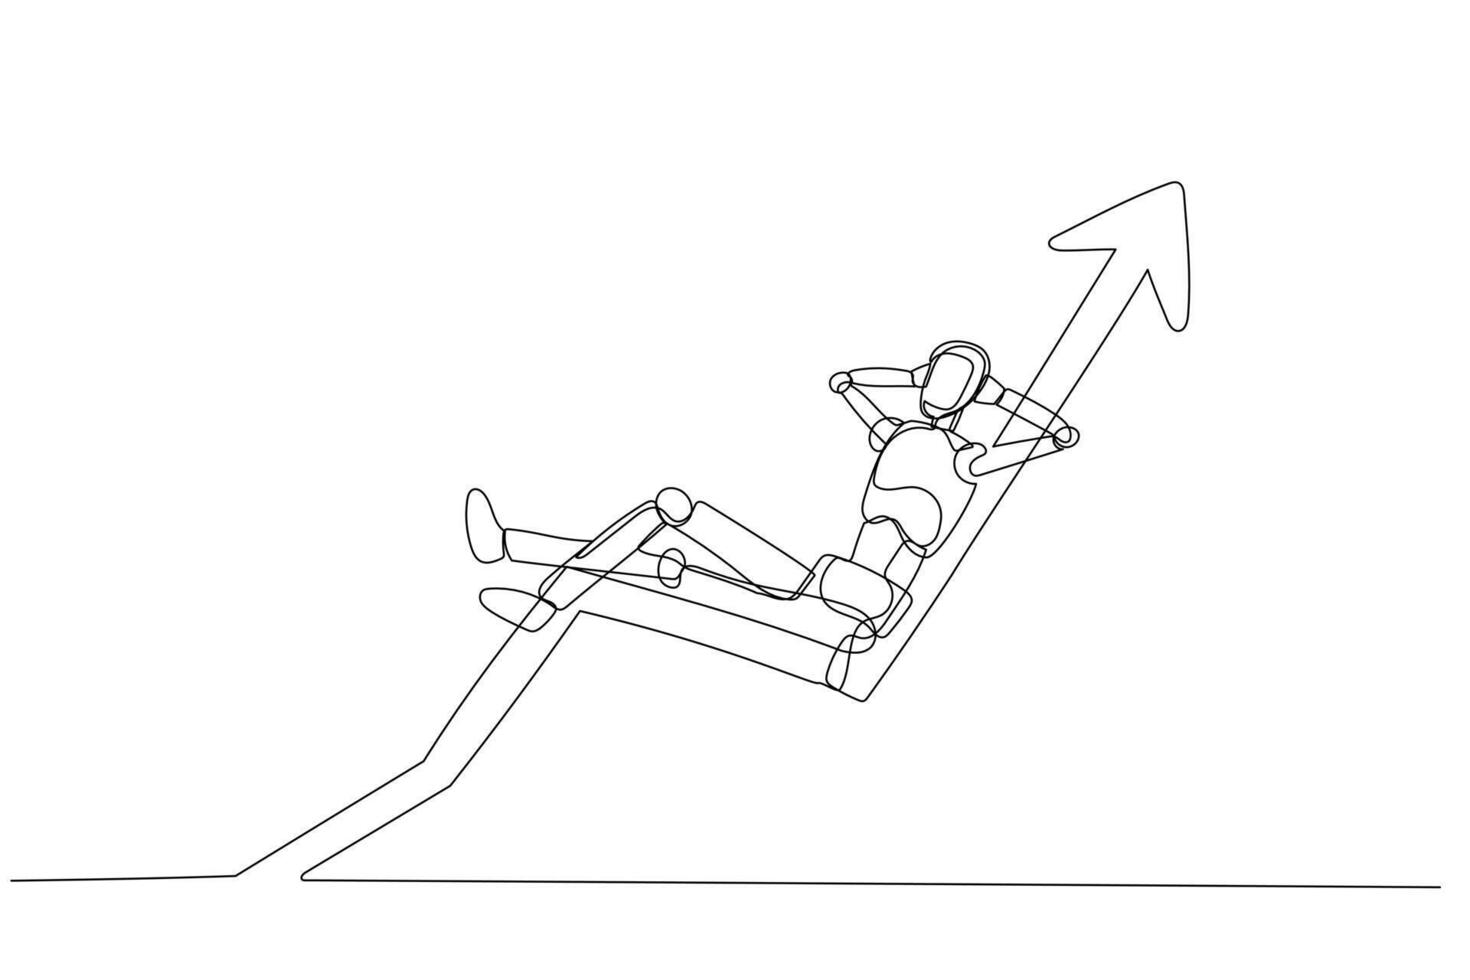 Simple line art of a humanoid figure reclining in an upward arrow indicating growth or progress. It conveys the concept that relaxation or ease can lead to upward progress or growth. vector